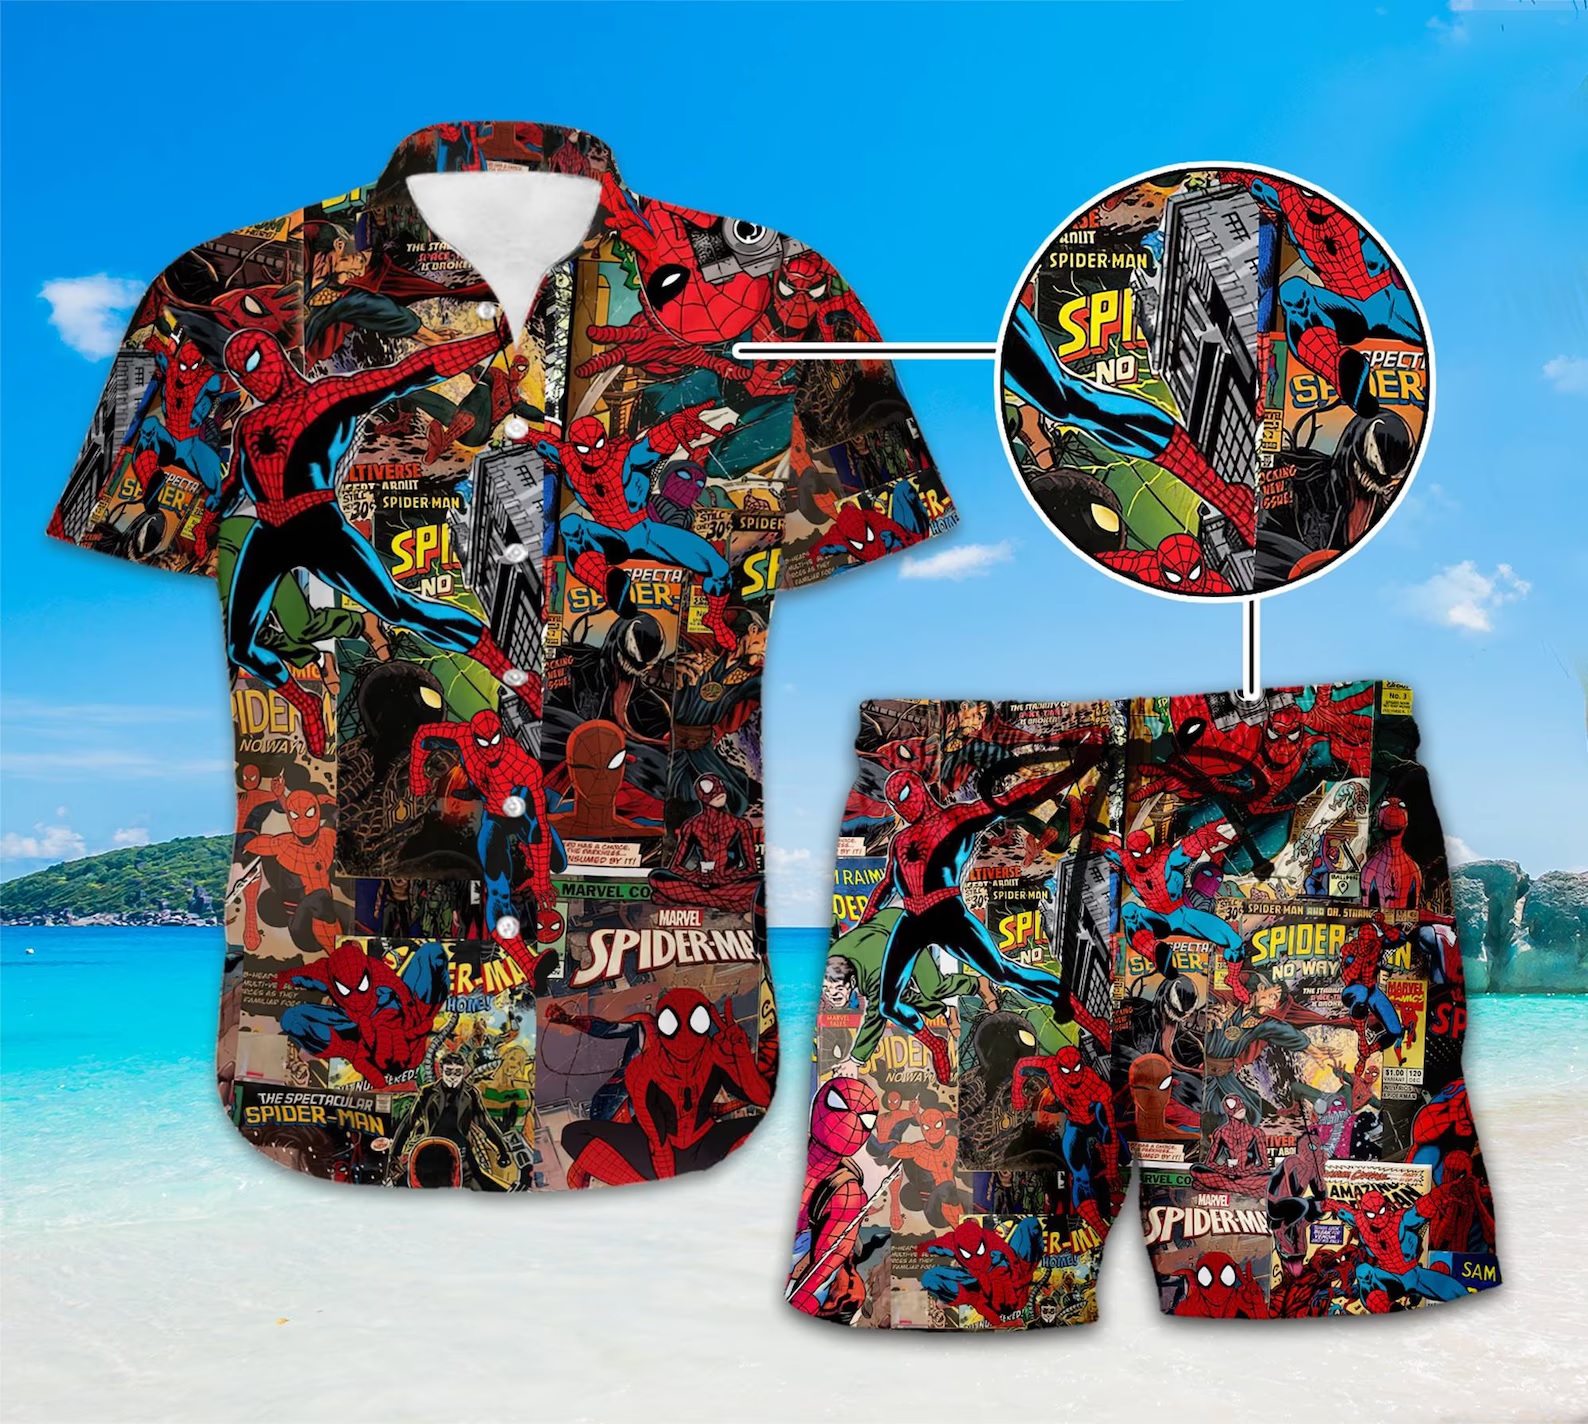 A Hawaiian shirt and matching shorts that feature images from vintage Spider-man comics